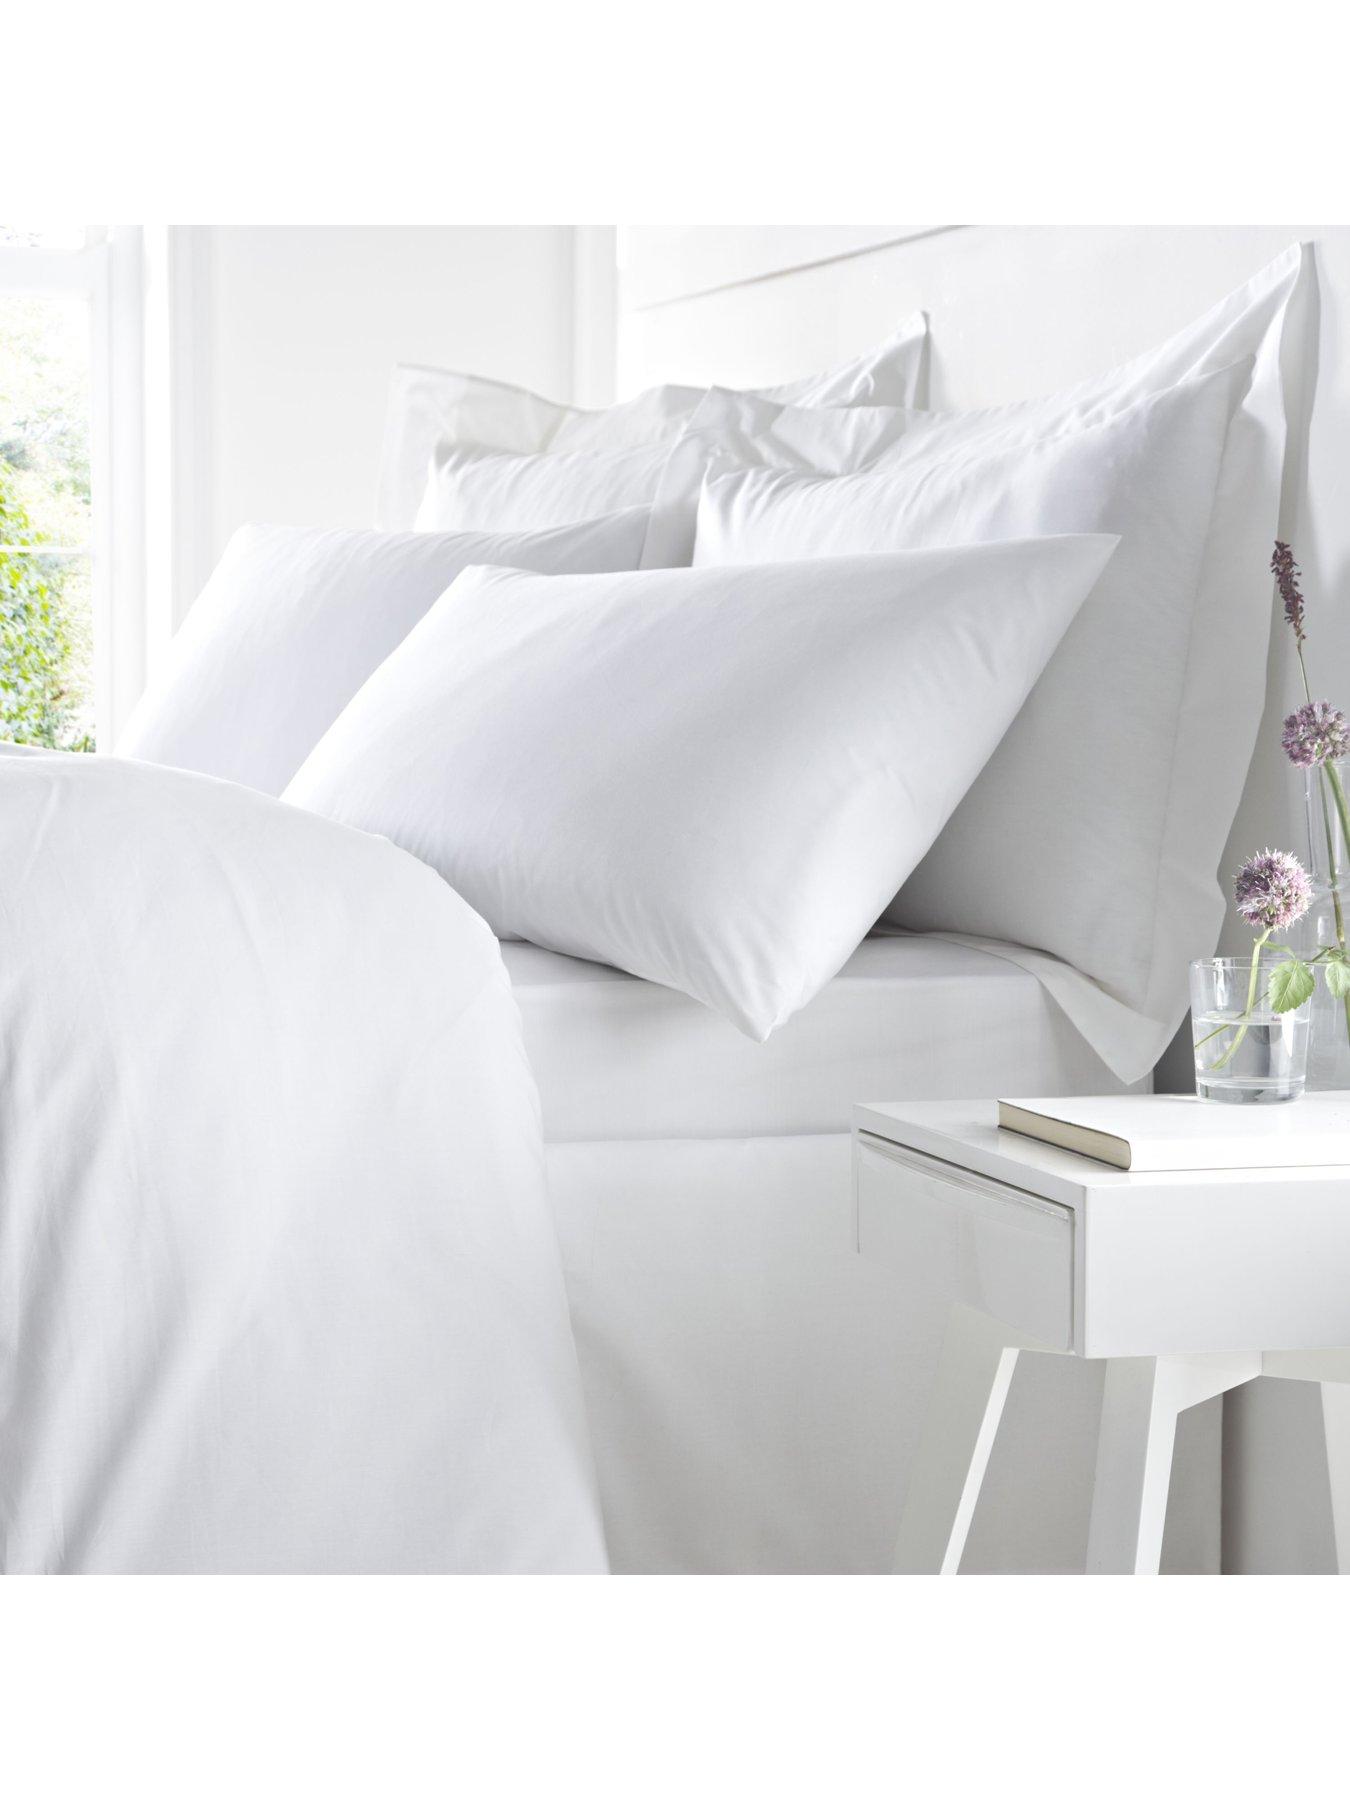 FLAT SHEET PREMIUM HOTEL QUALITY ALL SIZE Details about   100% EGYPTIAN COTTON DUVET COVER SET 